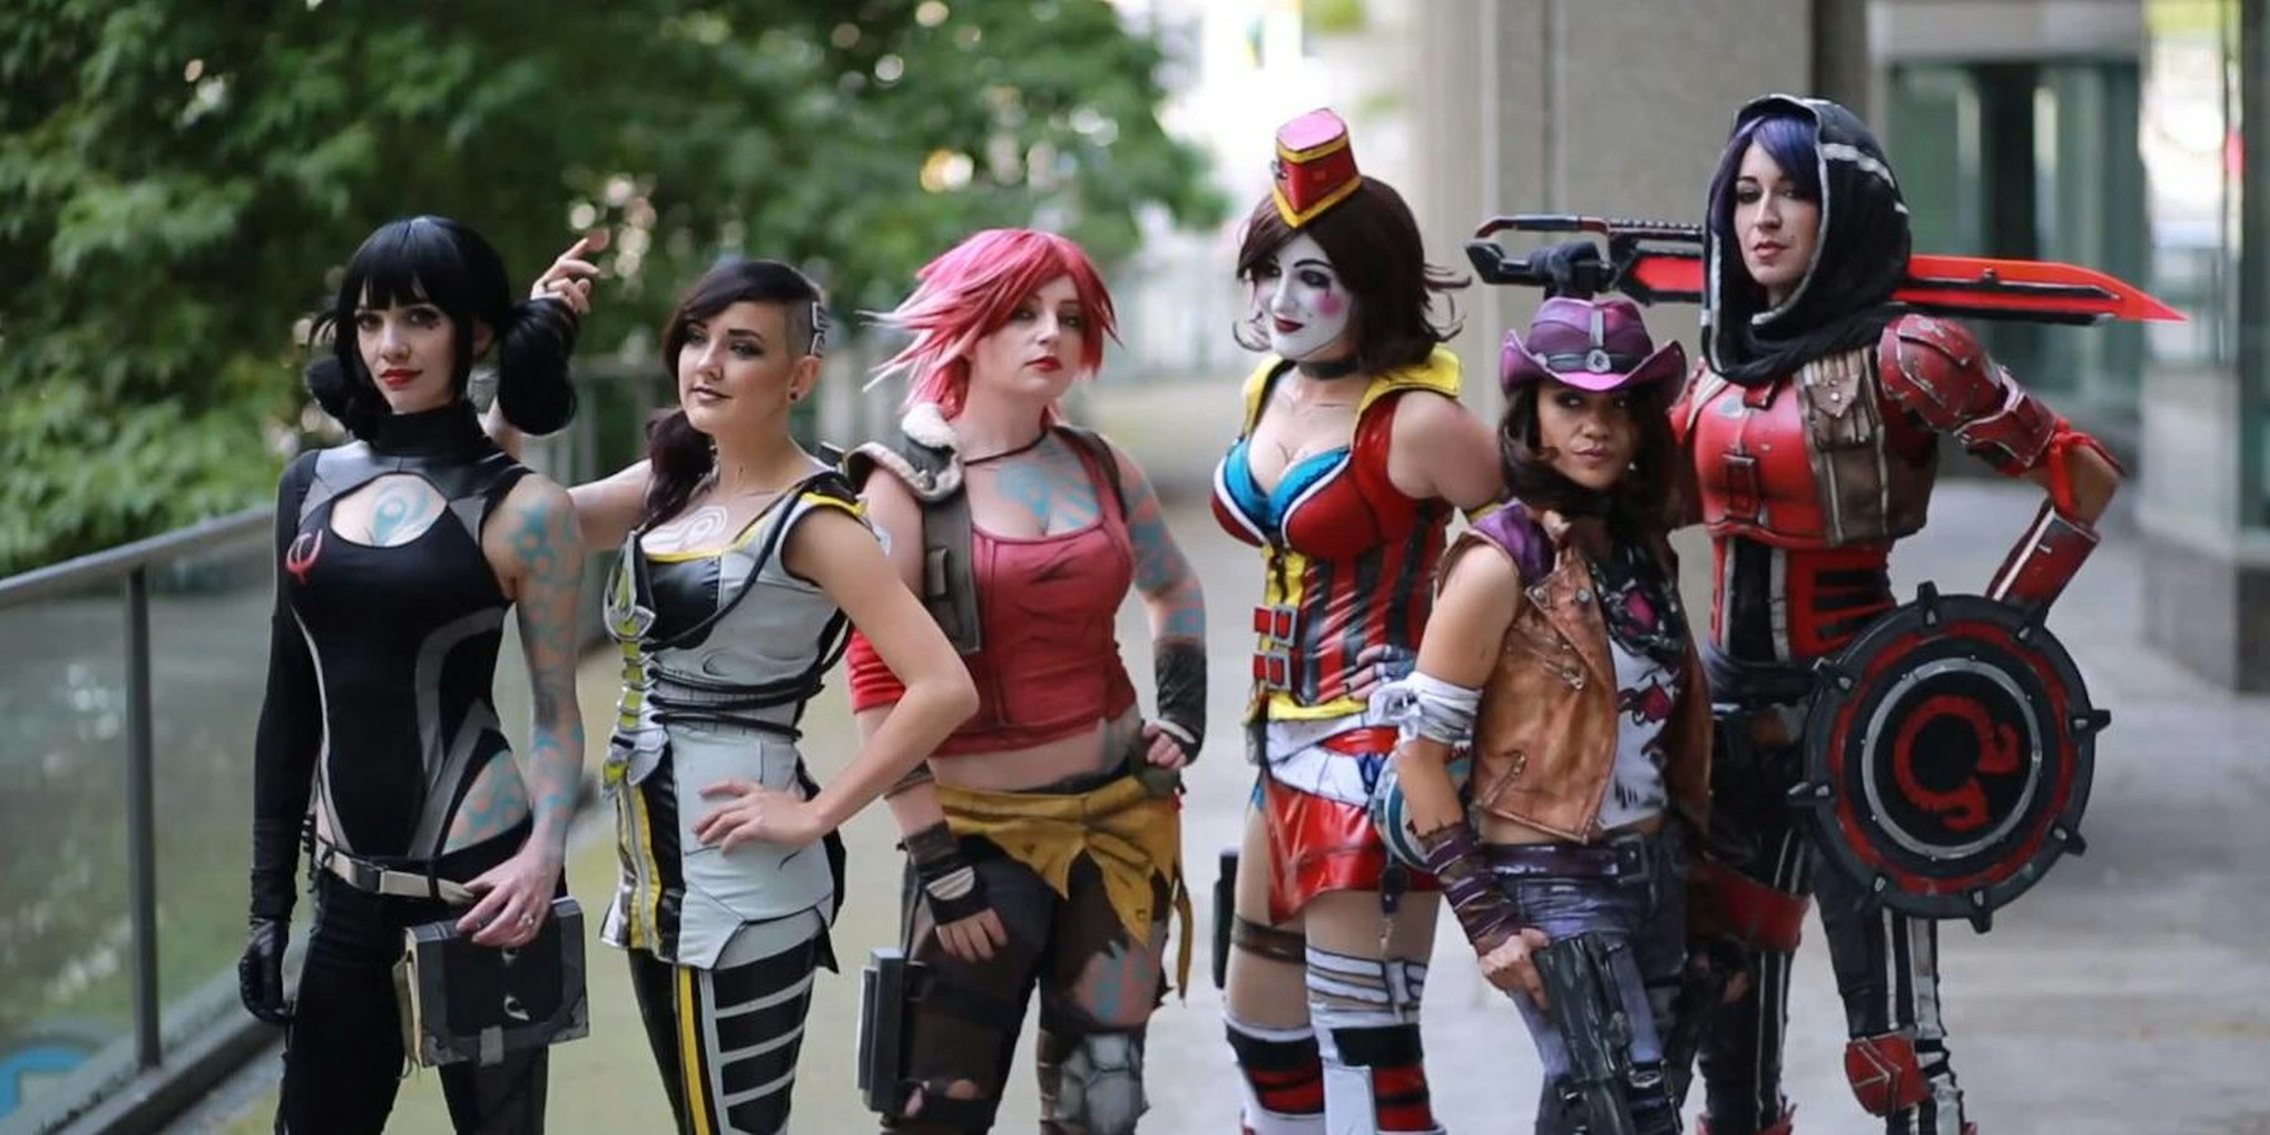 The Cosplay Community Gets The Documentary Series It Deserves